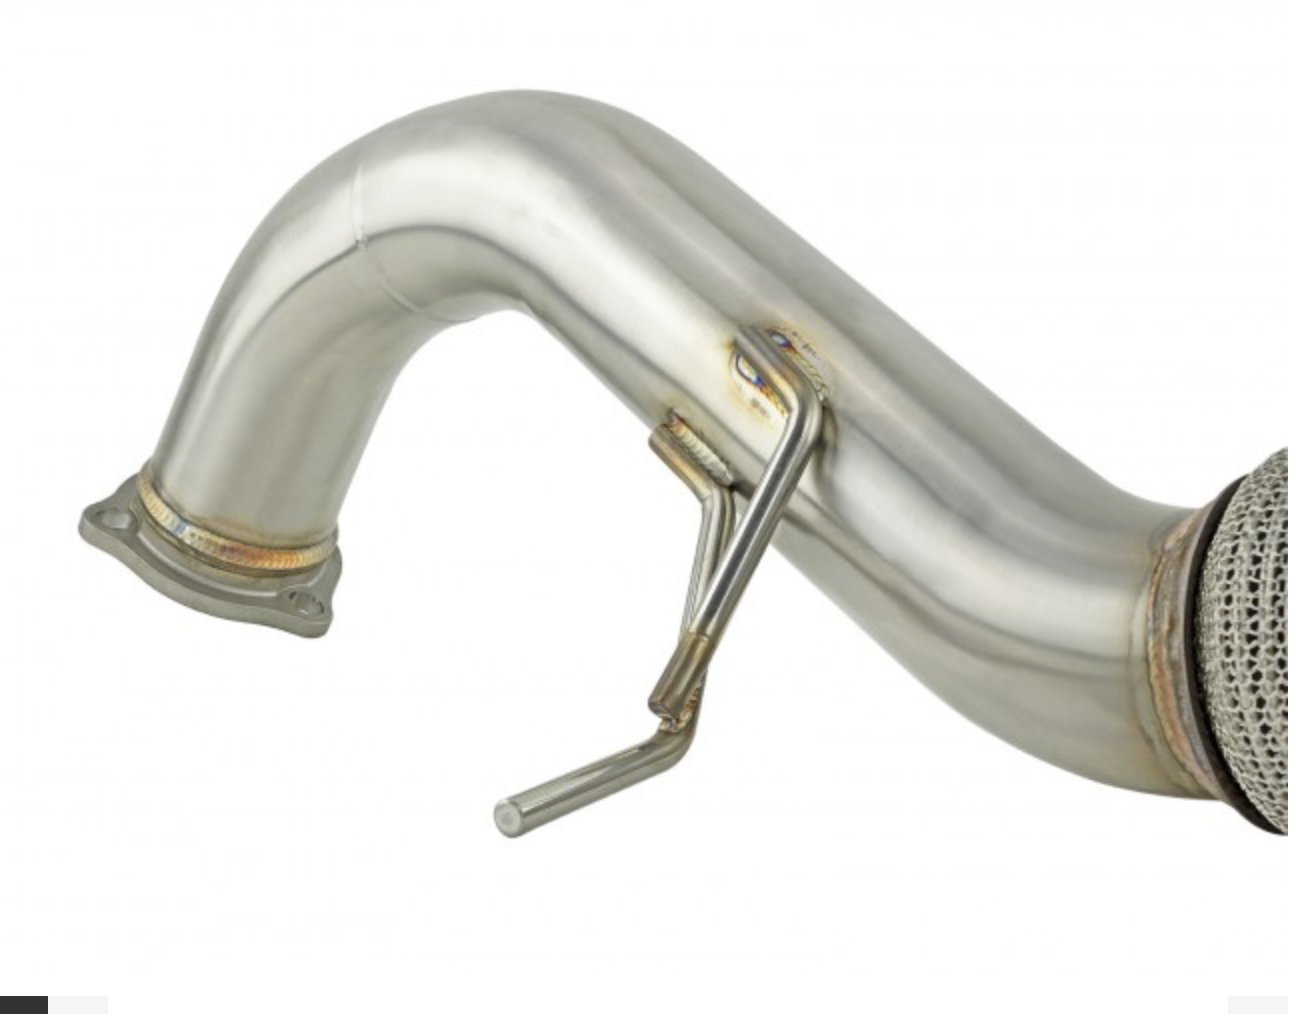 Skunk2 76mm 3" Downpipe with Cat 1.5T